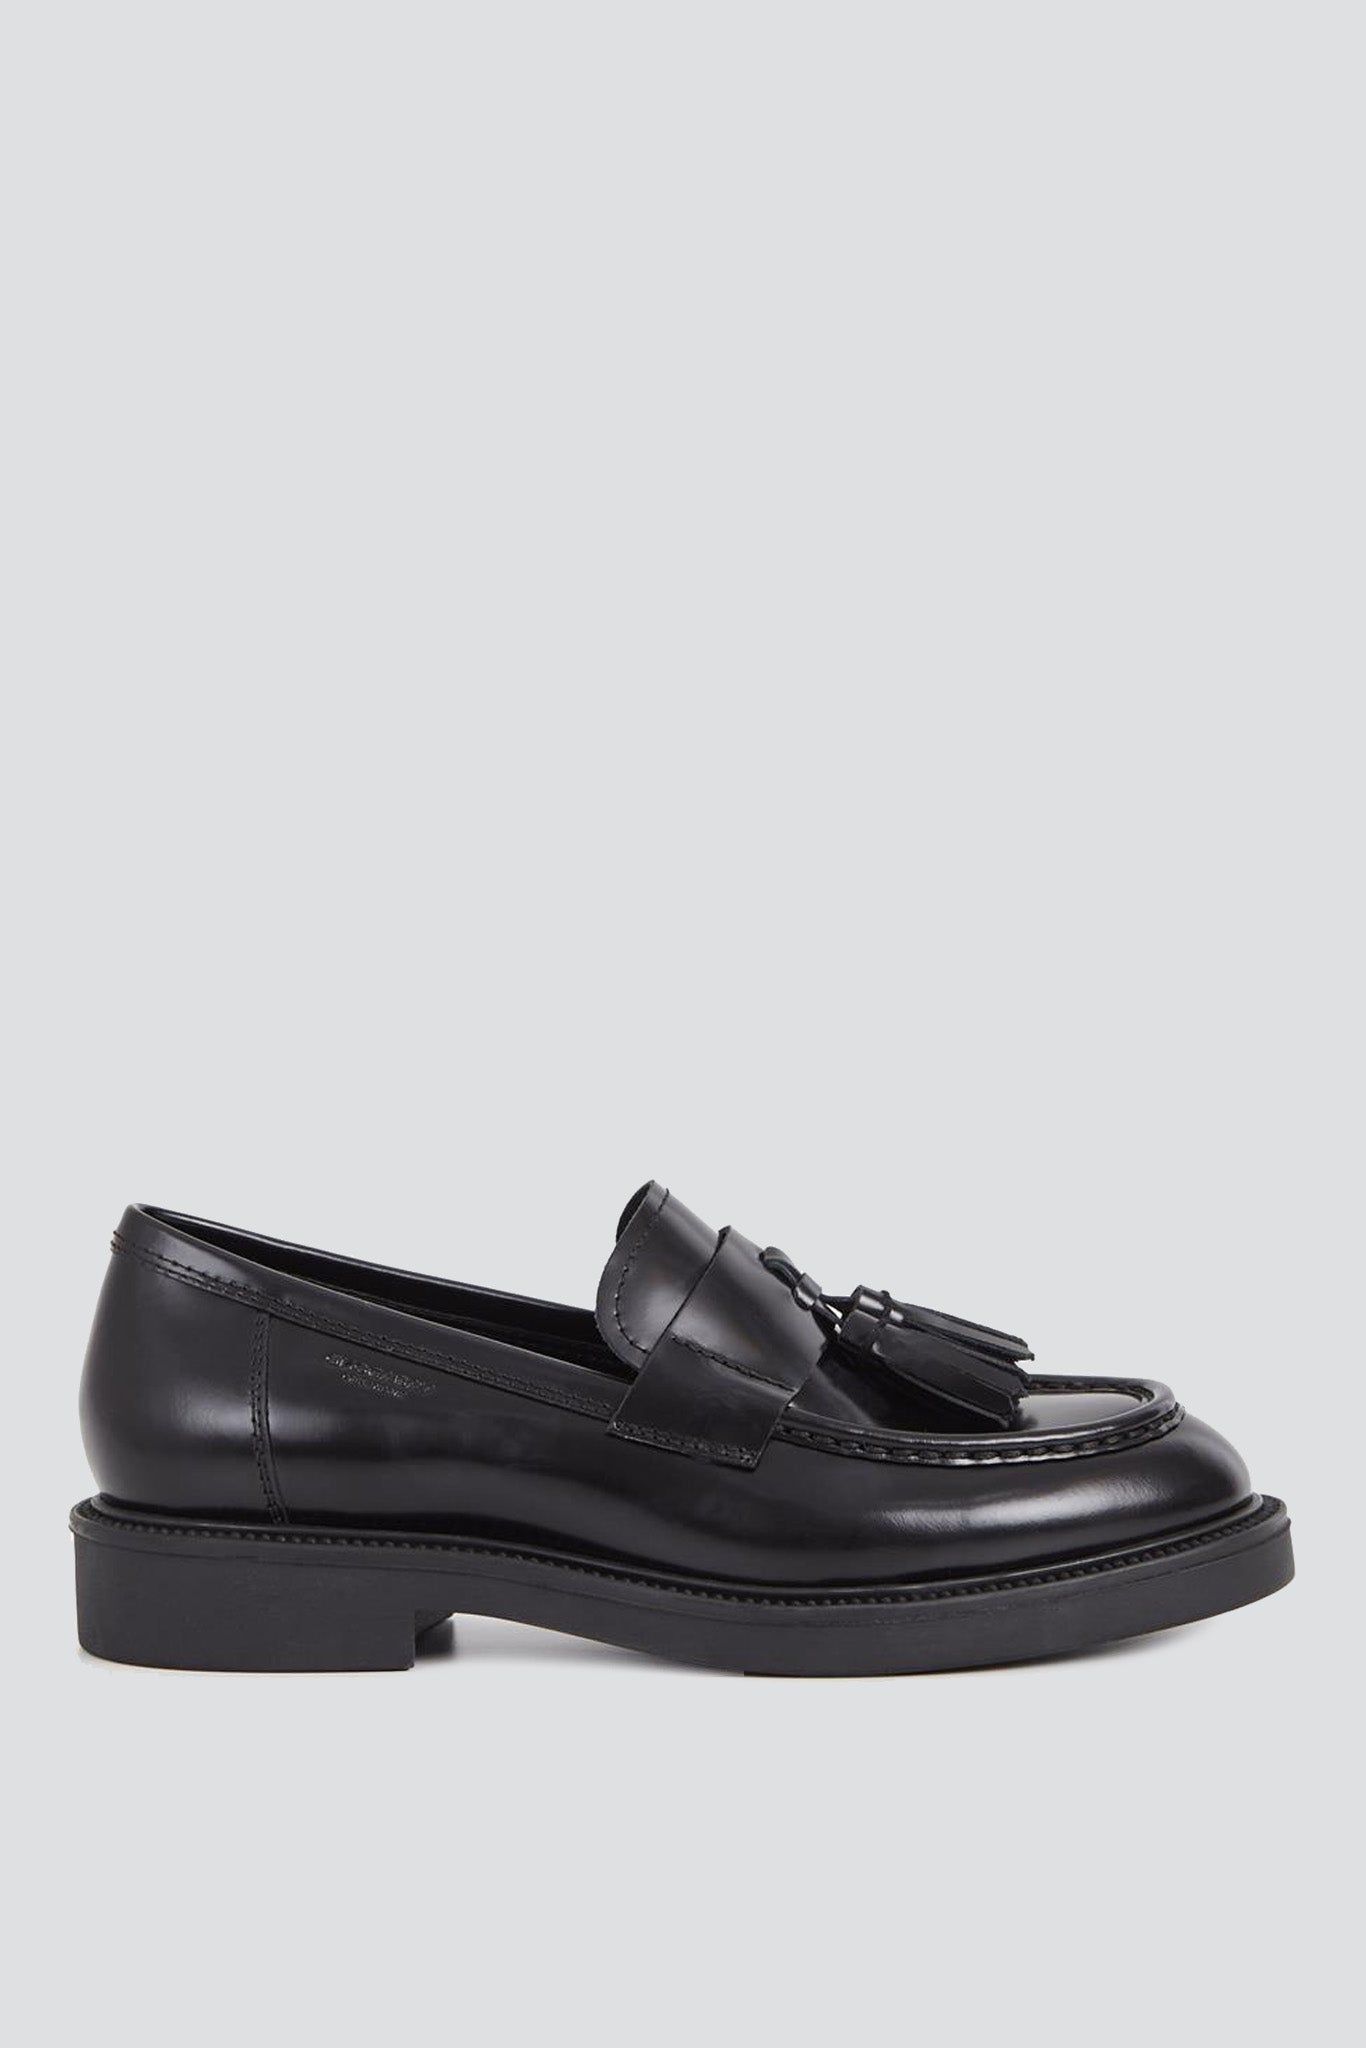 Stylish Steps: Elevating Your Look with Tassel Loafers